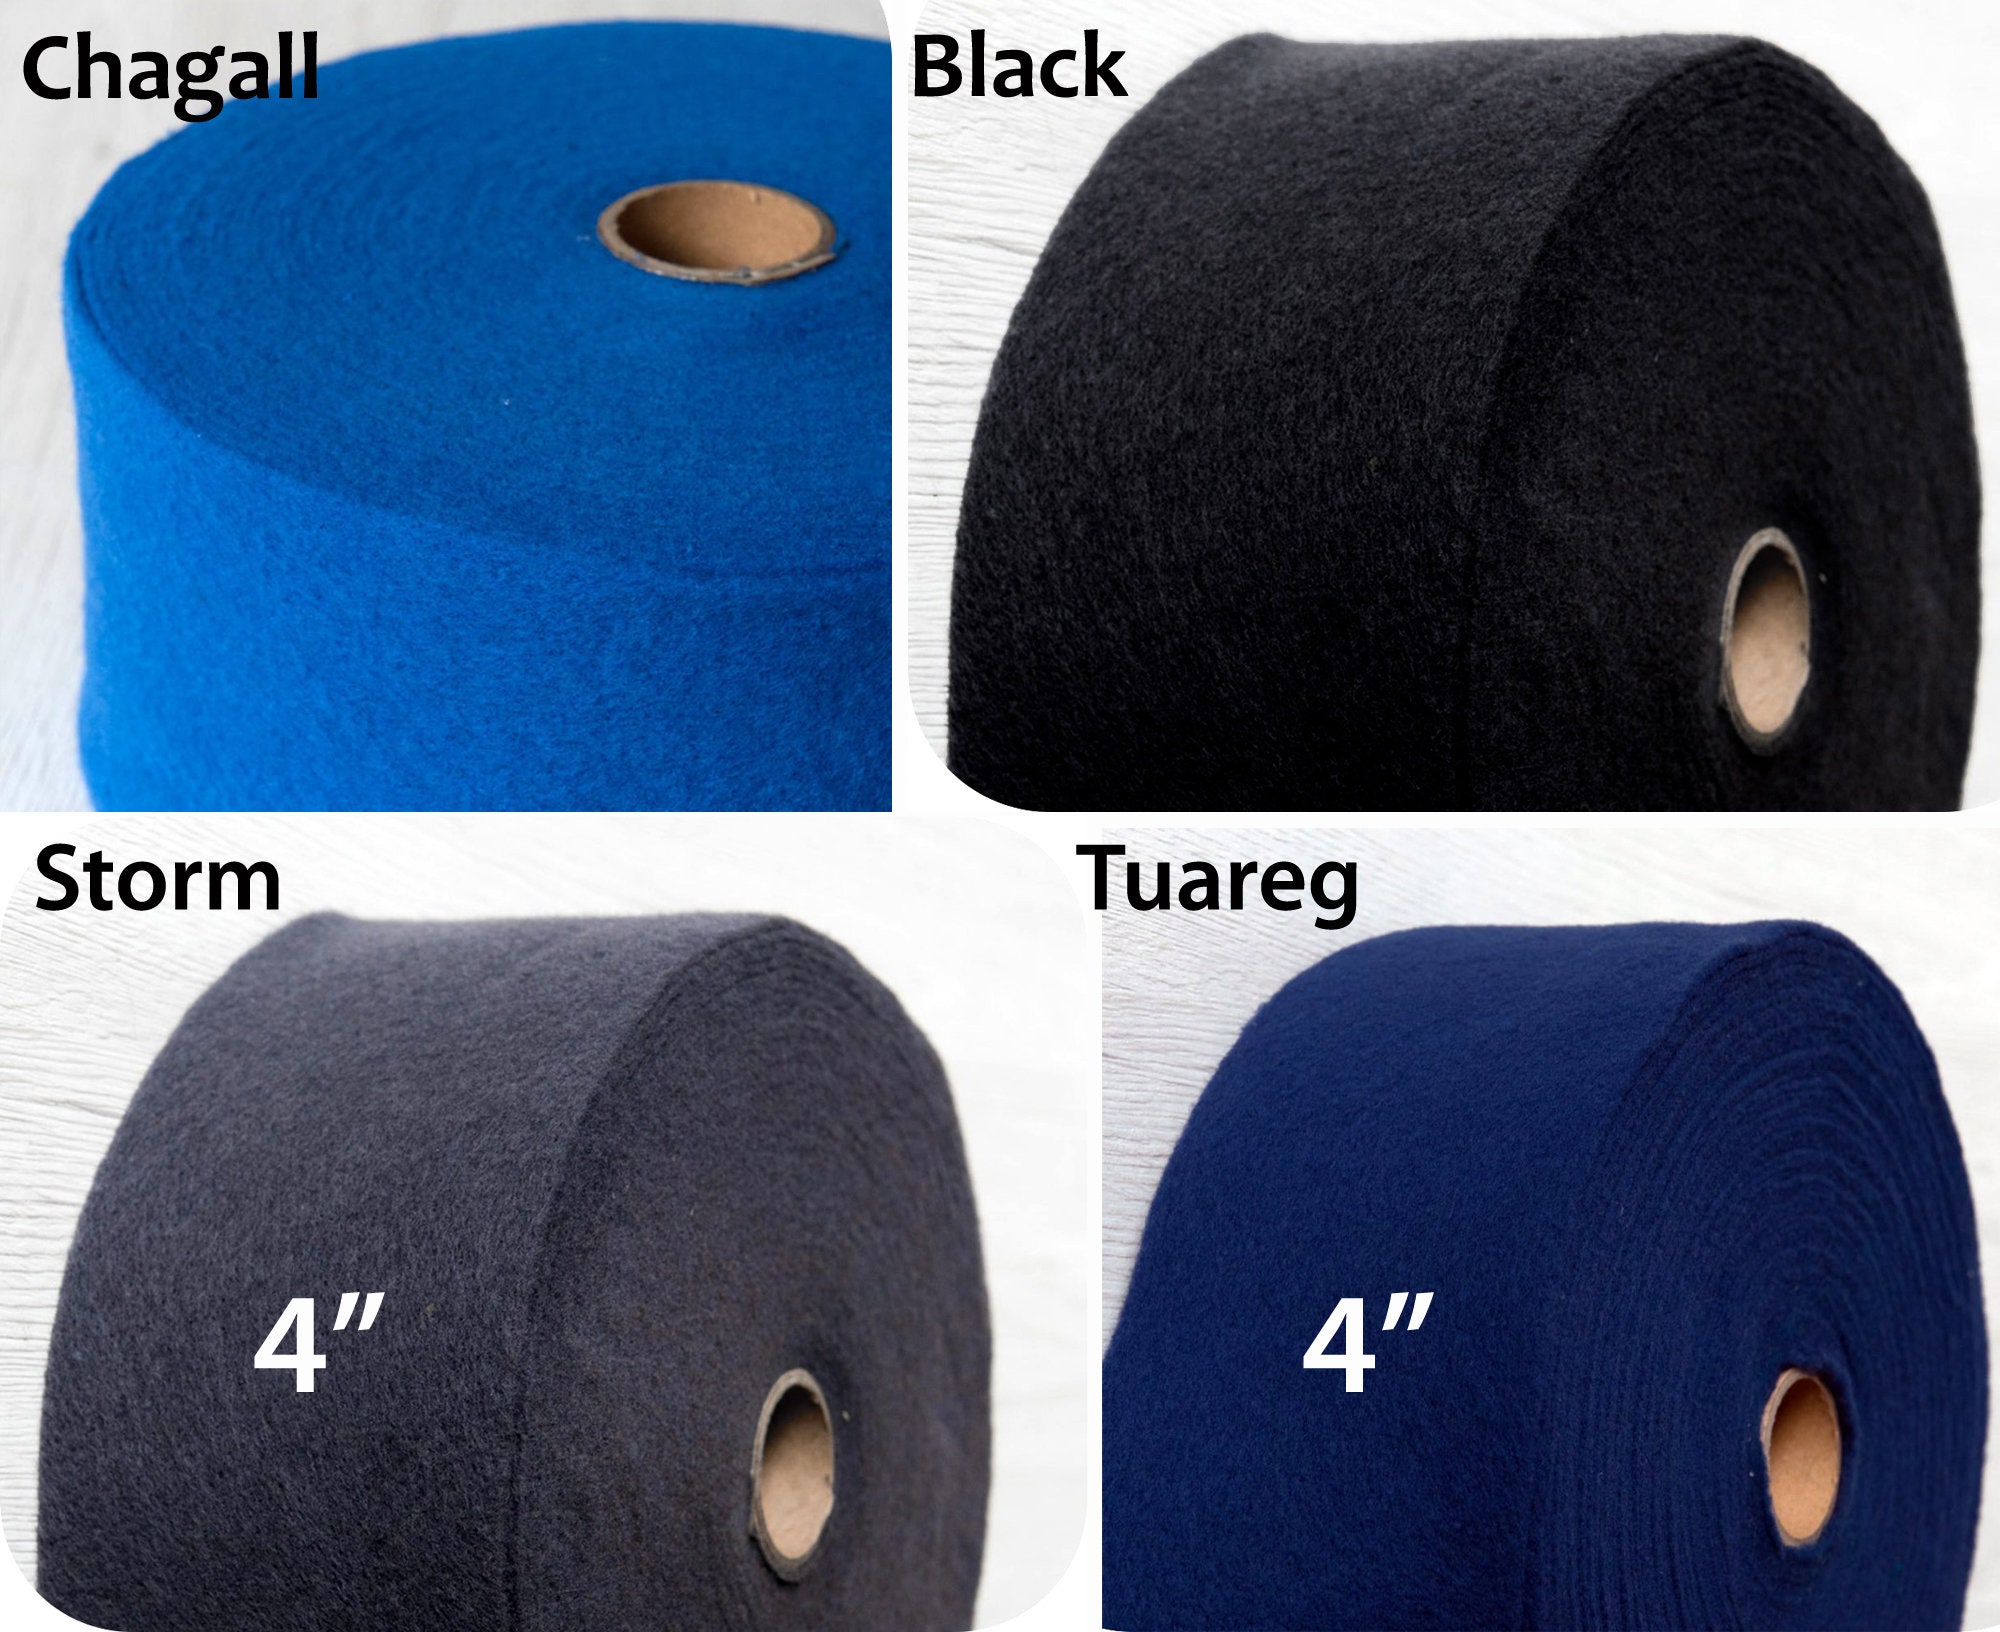 Hat Size Reducers 3 Economy Easy Fit Felt Strips in Black, the